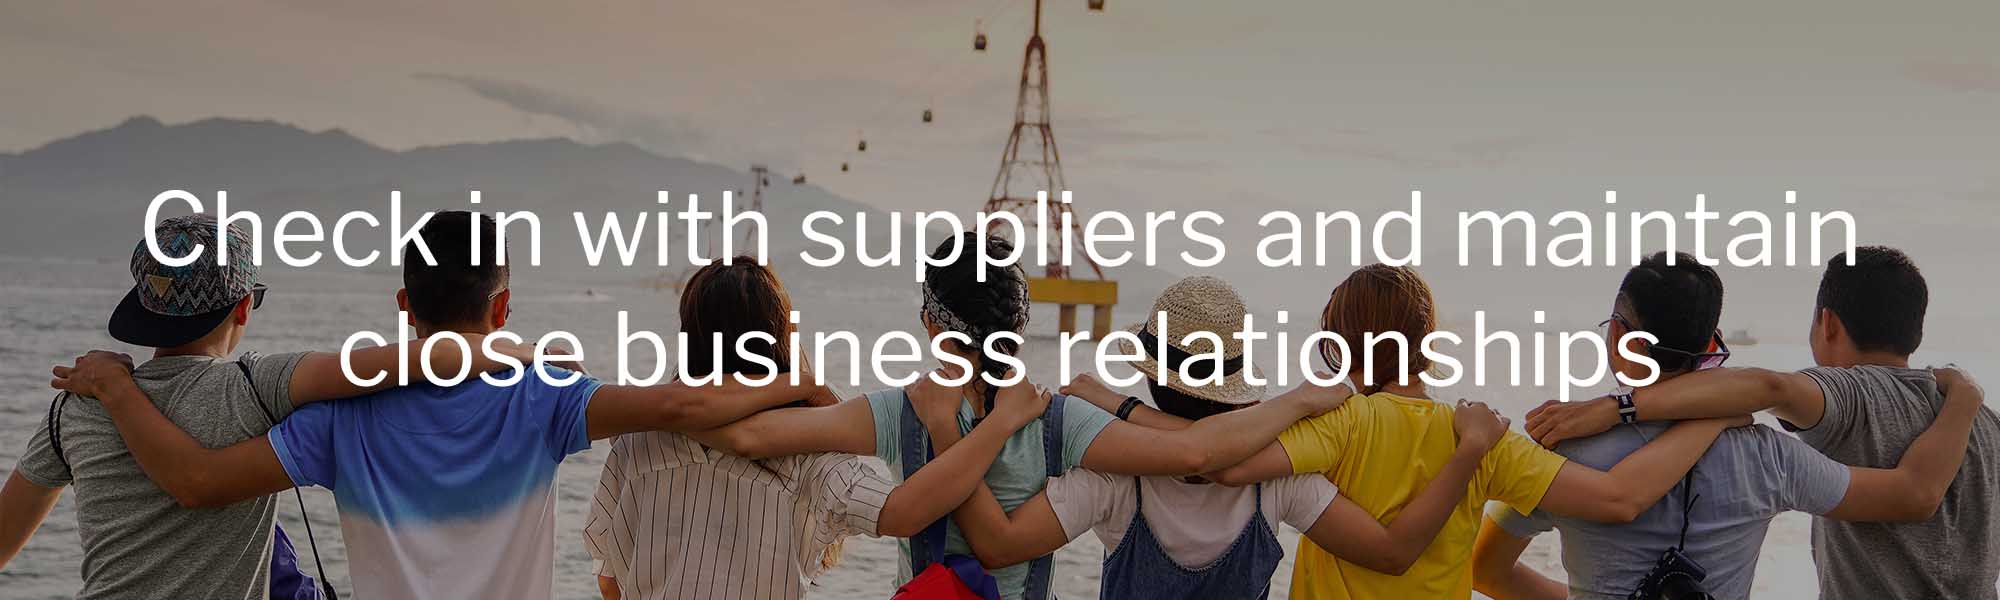 supplier relationships in tourism